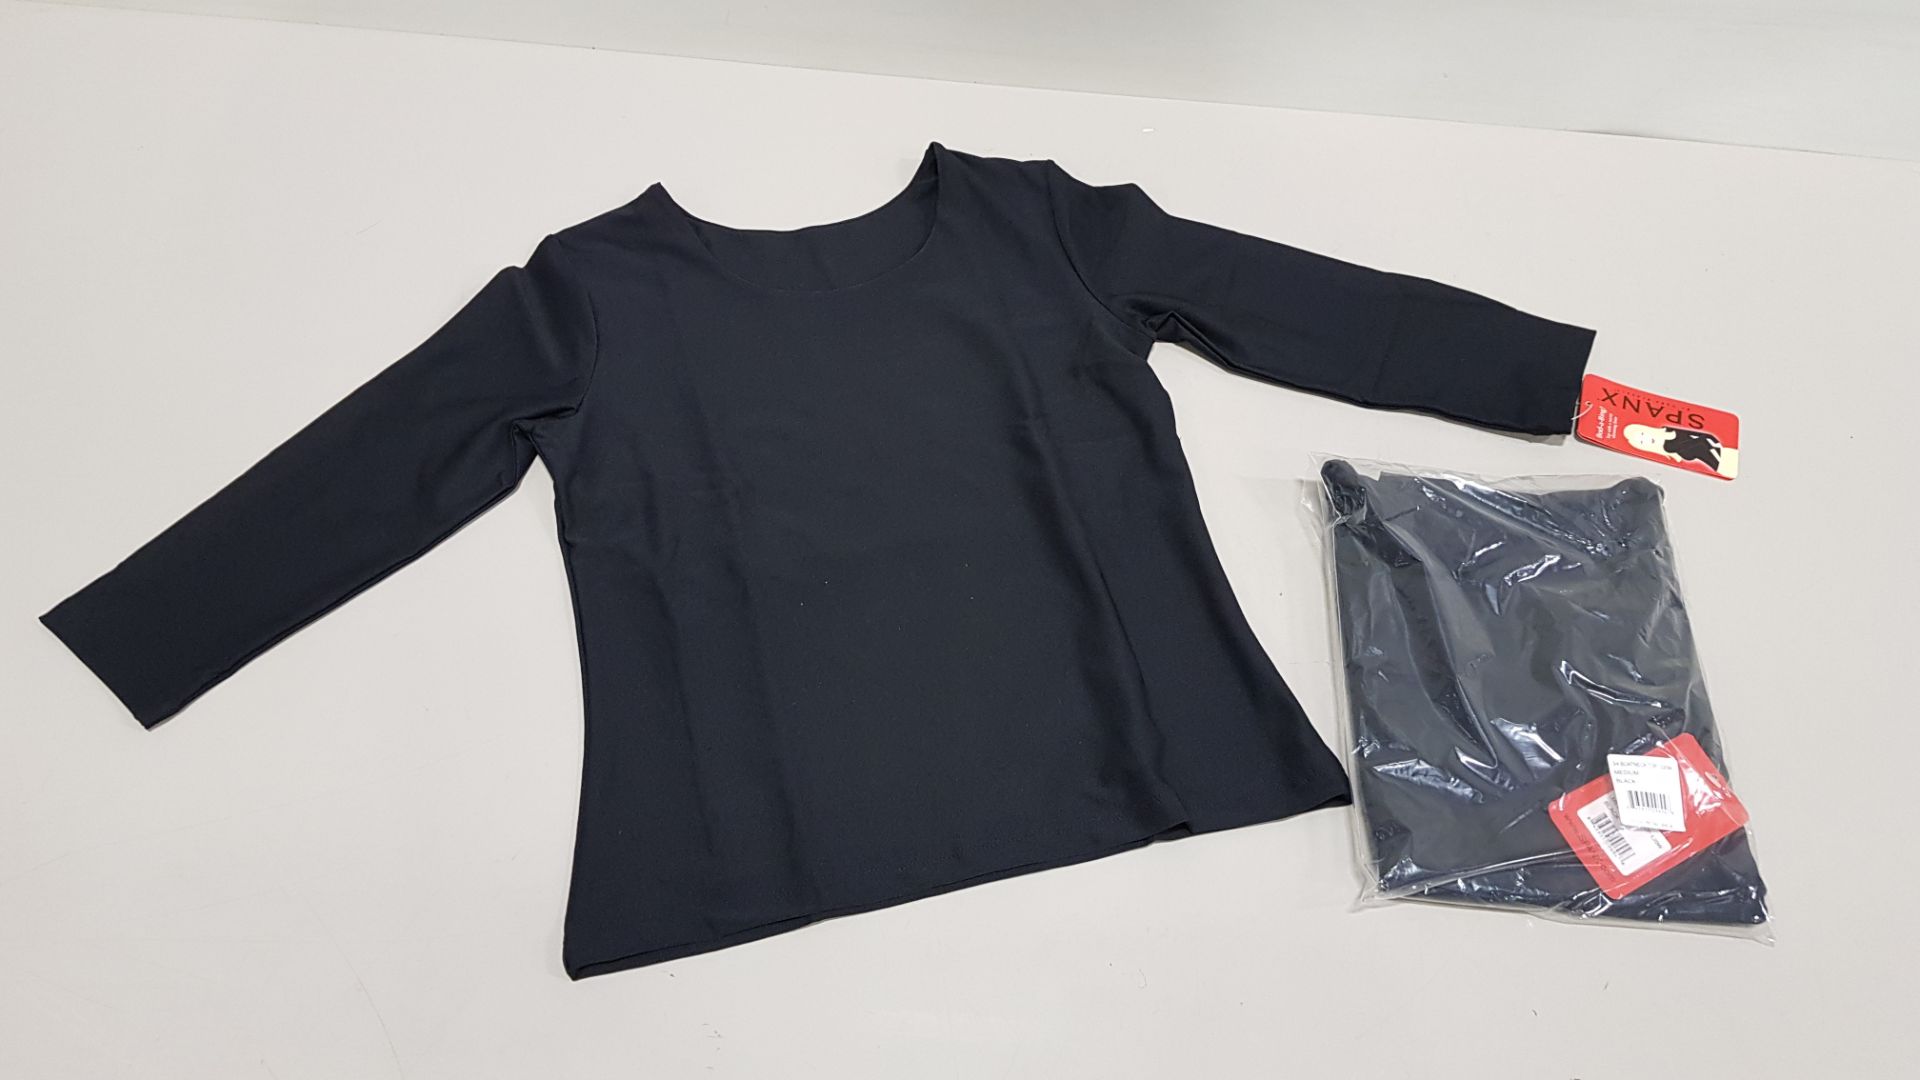 20 X BRAND NEW SPANX THREE QUARTER BOAT NECK TOP IN BLACK, SIZE LARGE RRP $58.00 (TOTAL RRP $1168.